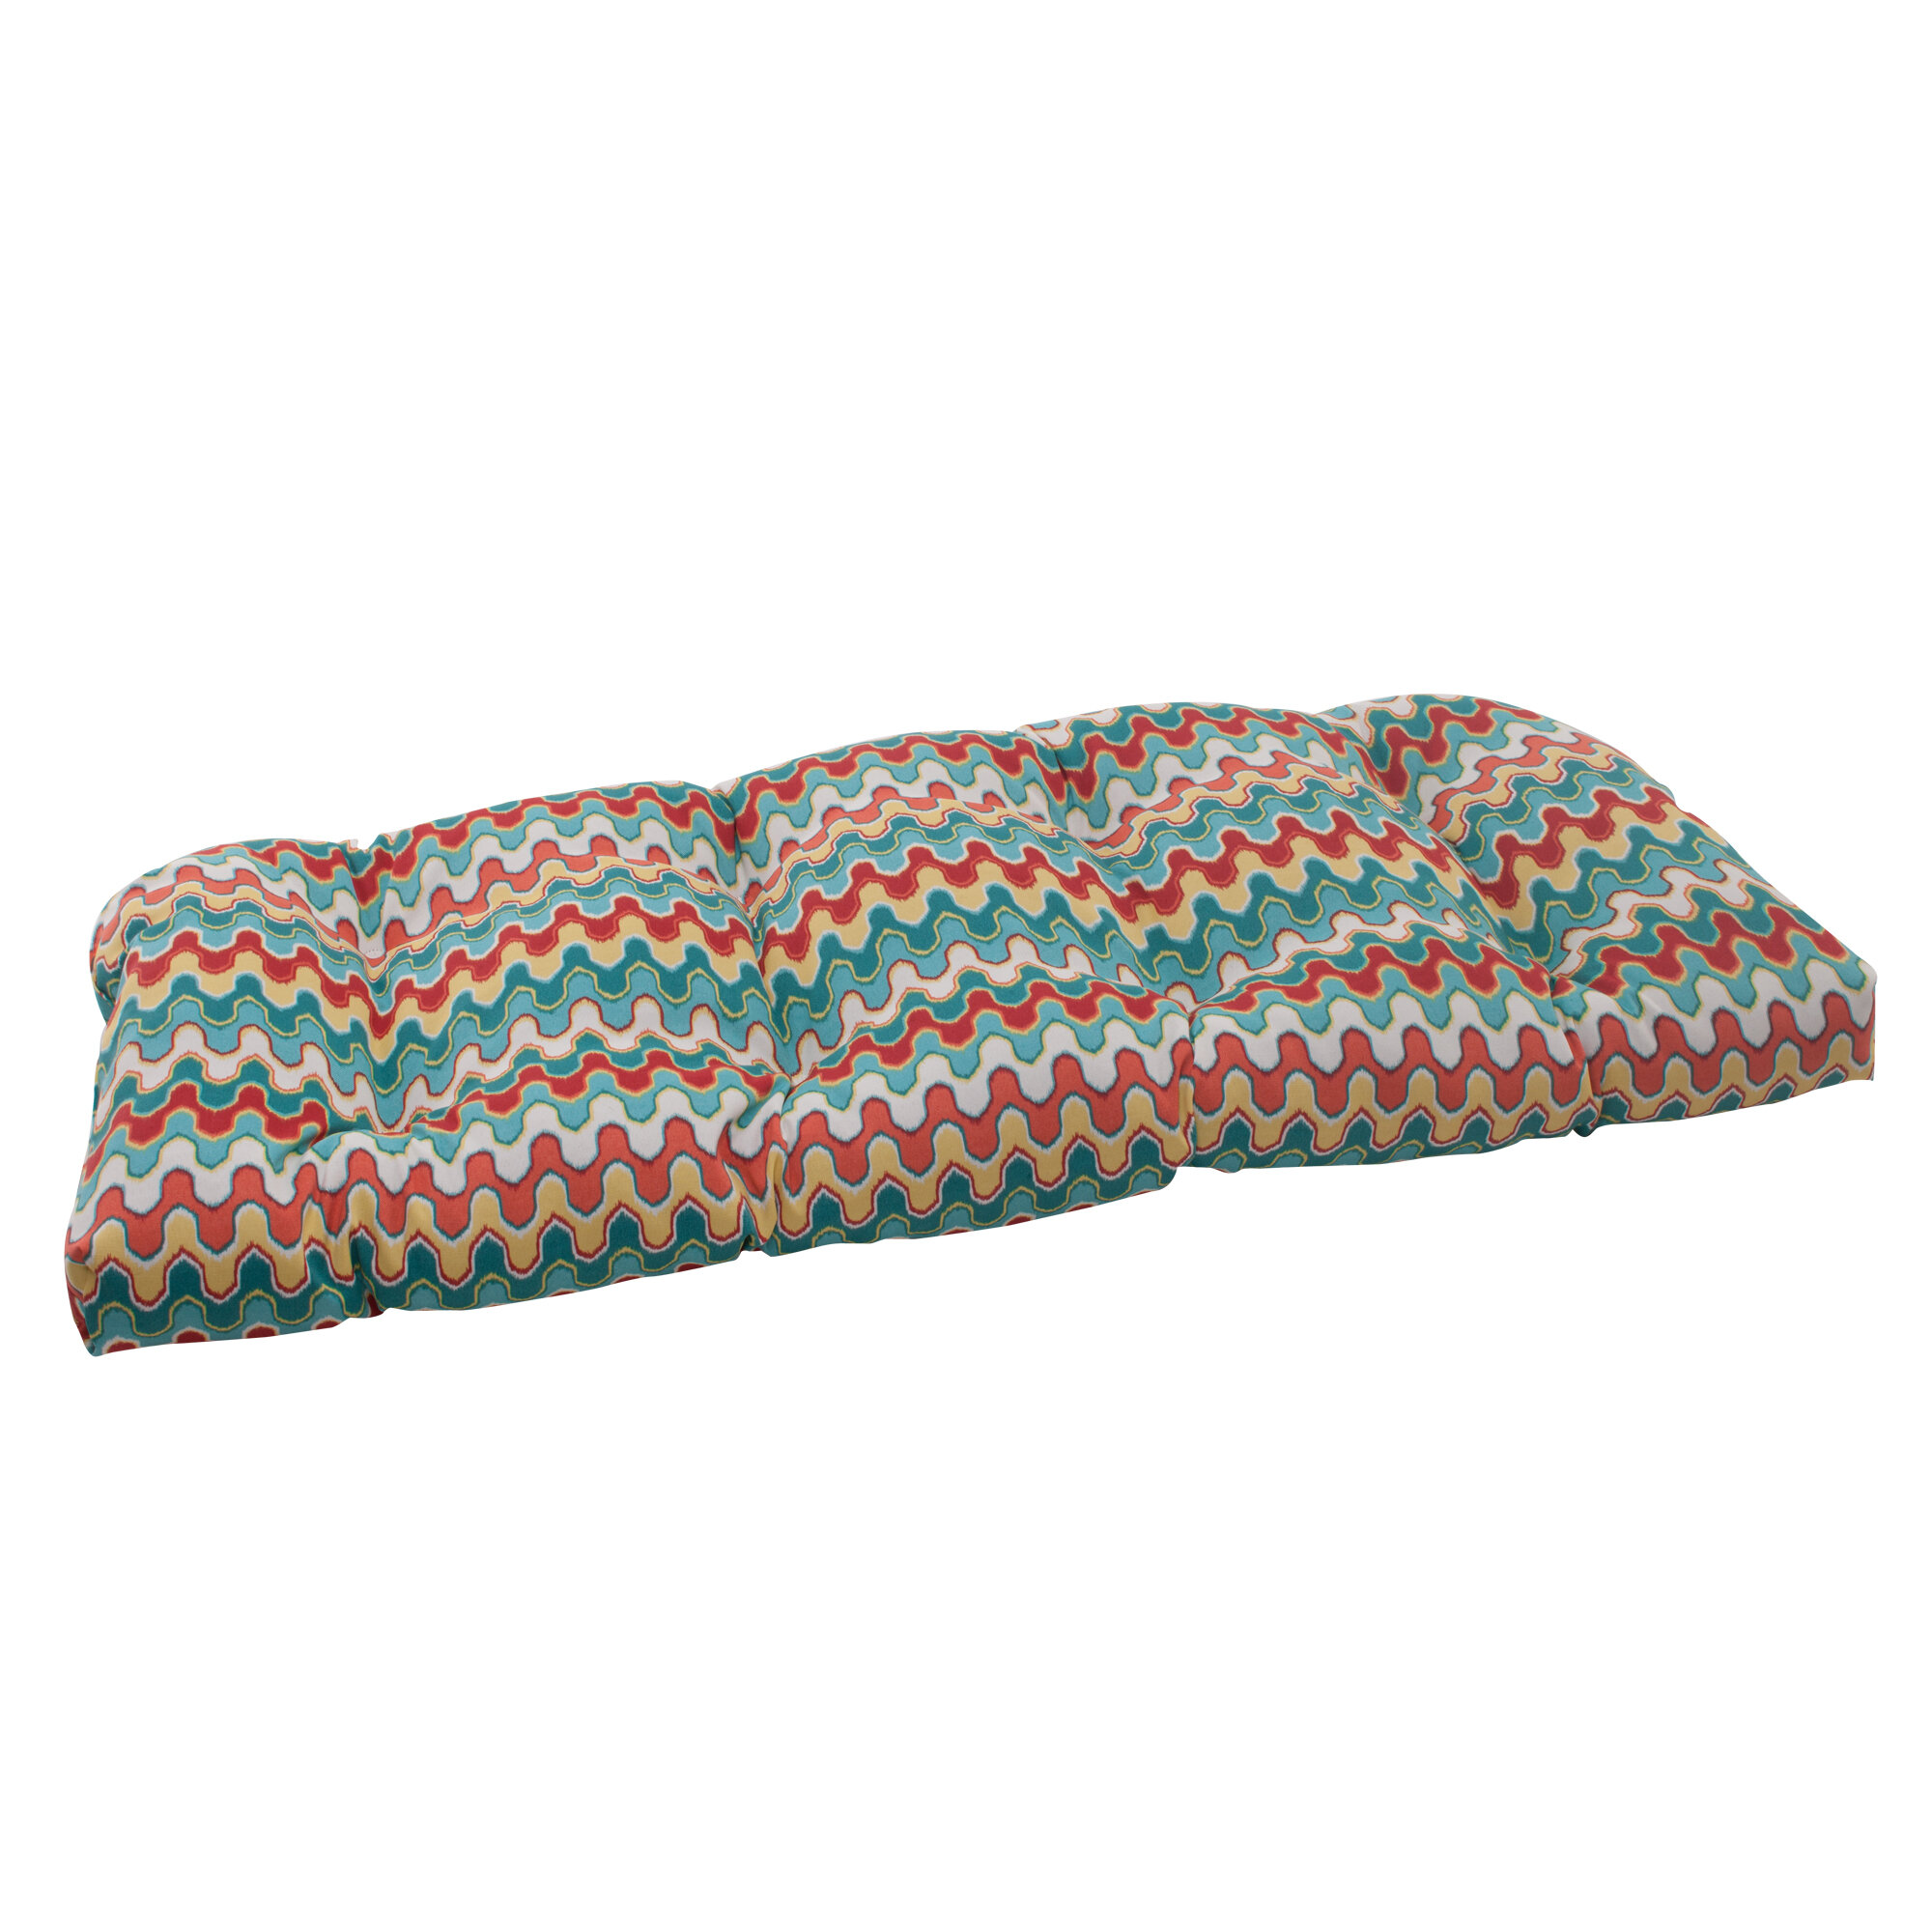 Pillow Perfect Indoor/Outdoor Nivala Wicker Seat Cushion Set of 2 Blue